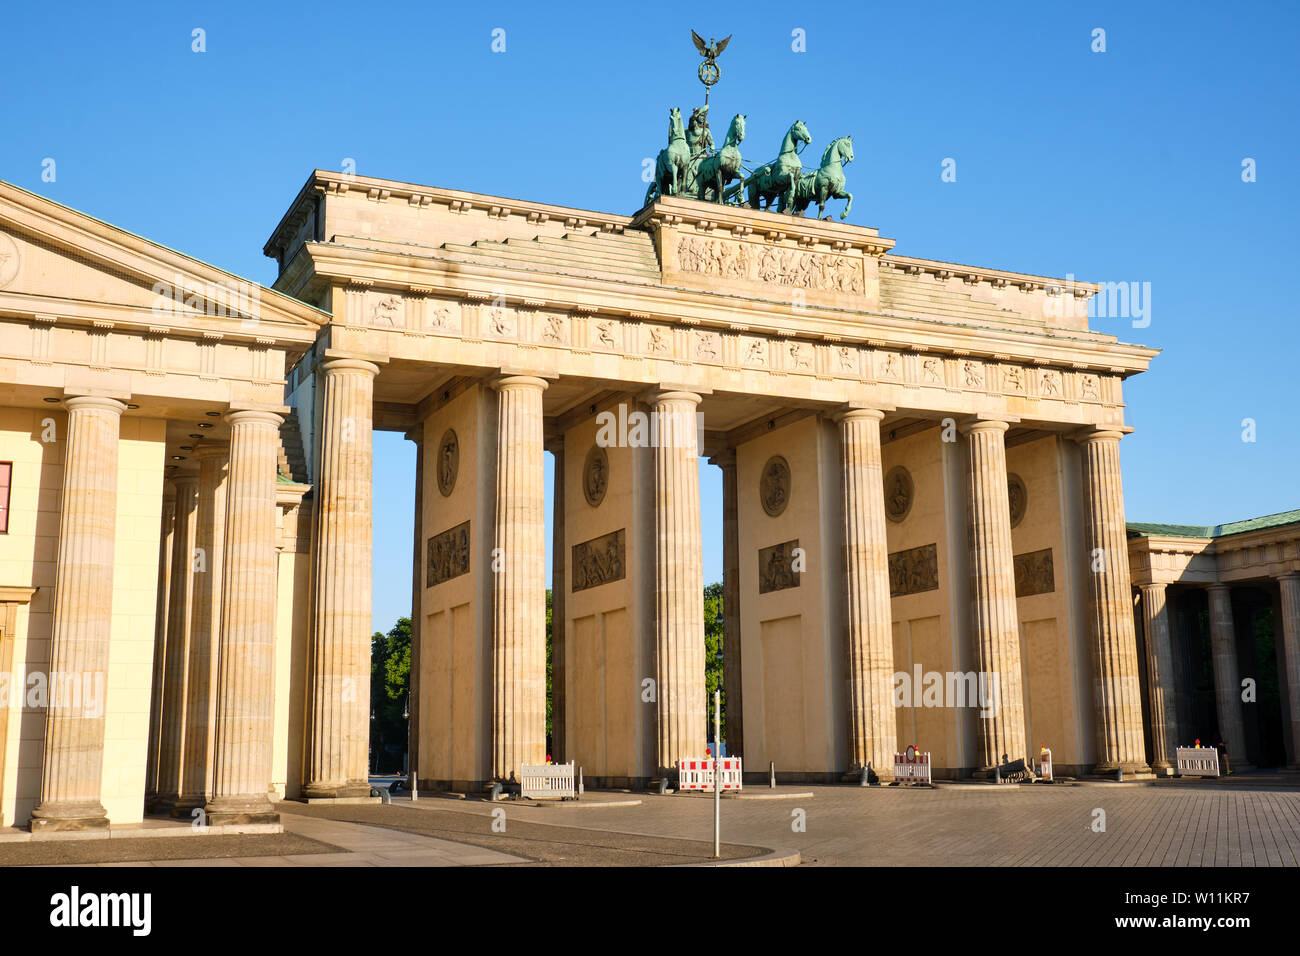 The iconic Brandenburg Gate in Berlin on a sunny day Stock Photo